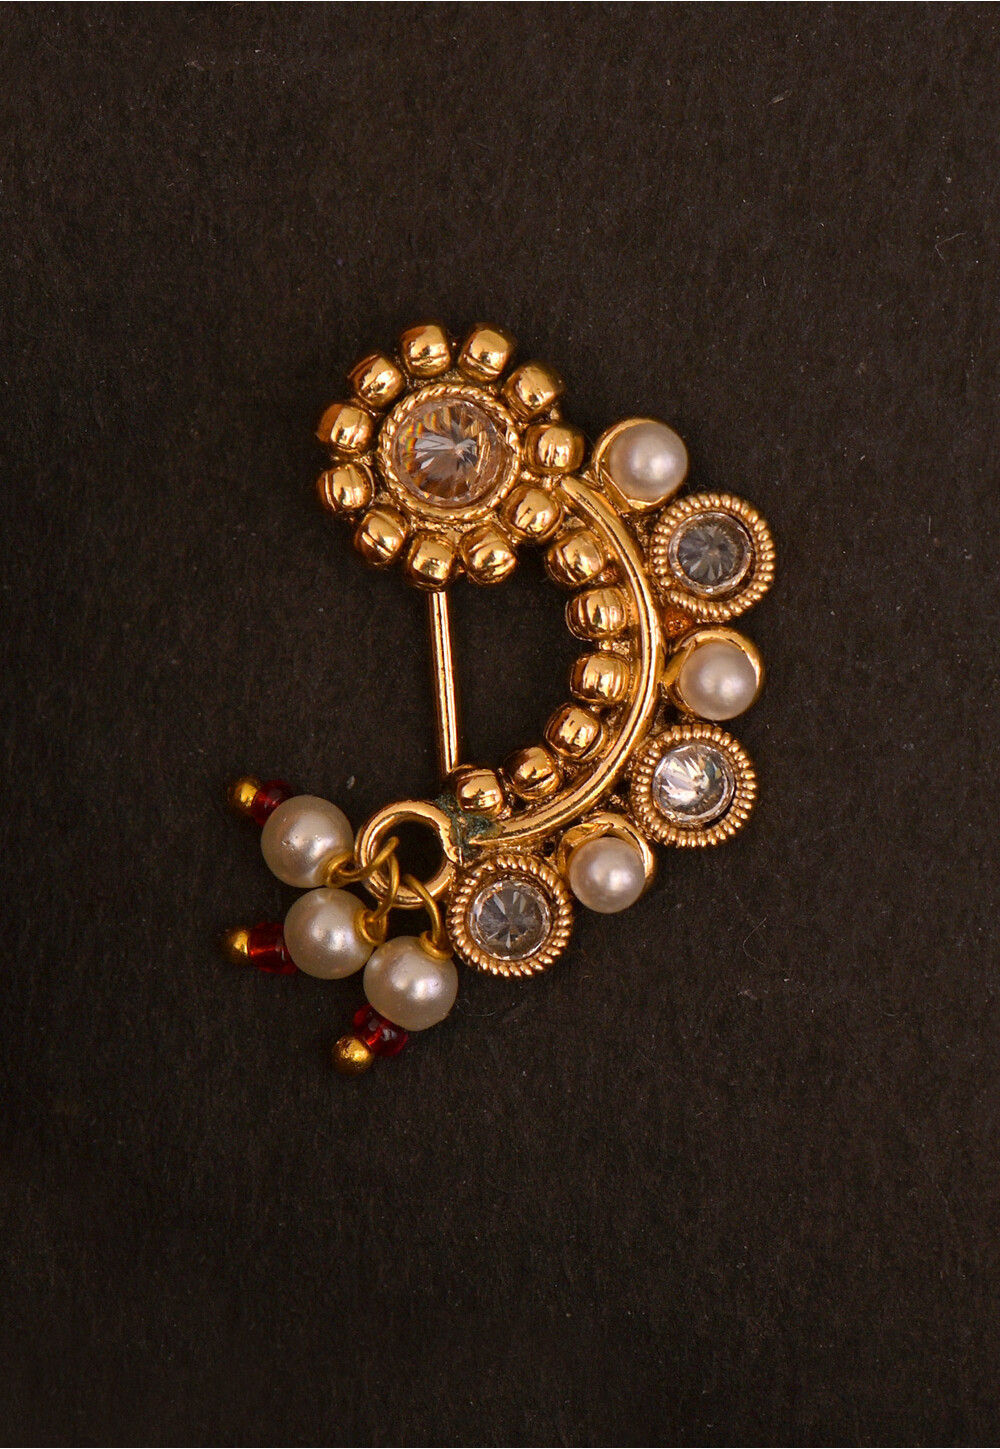 Shop Marathi Nose Ring for Women Online from India's Luxury Designers 2024